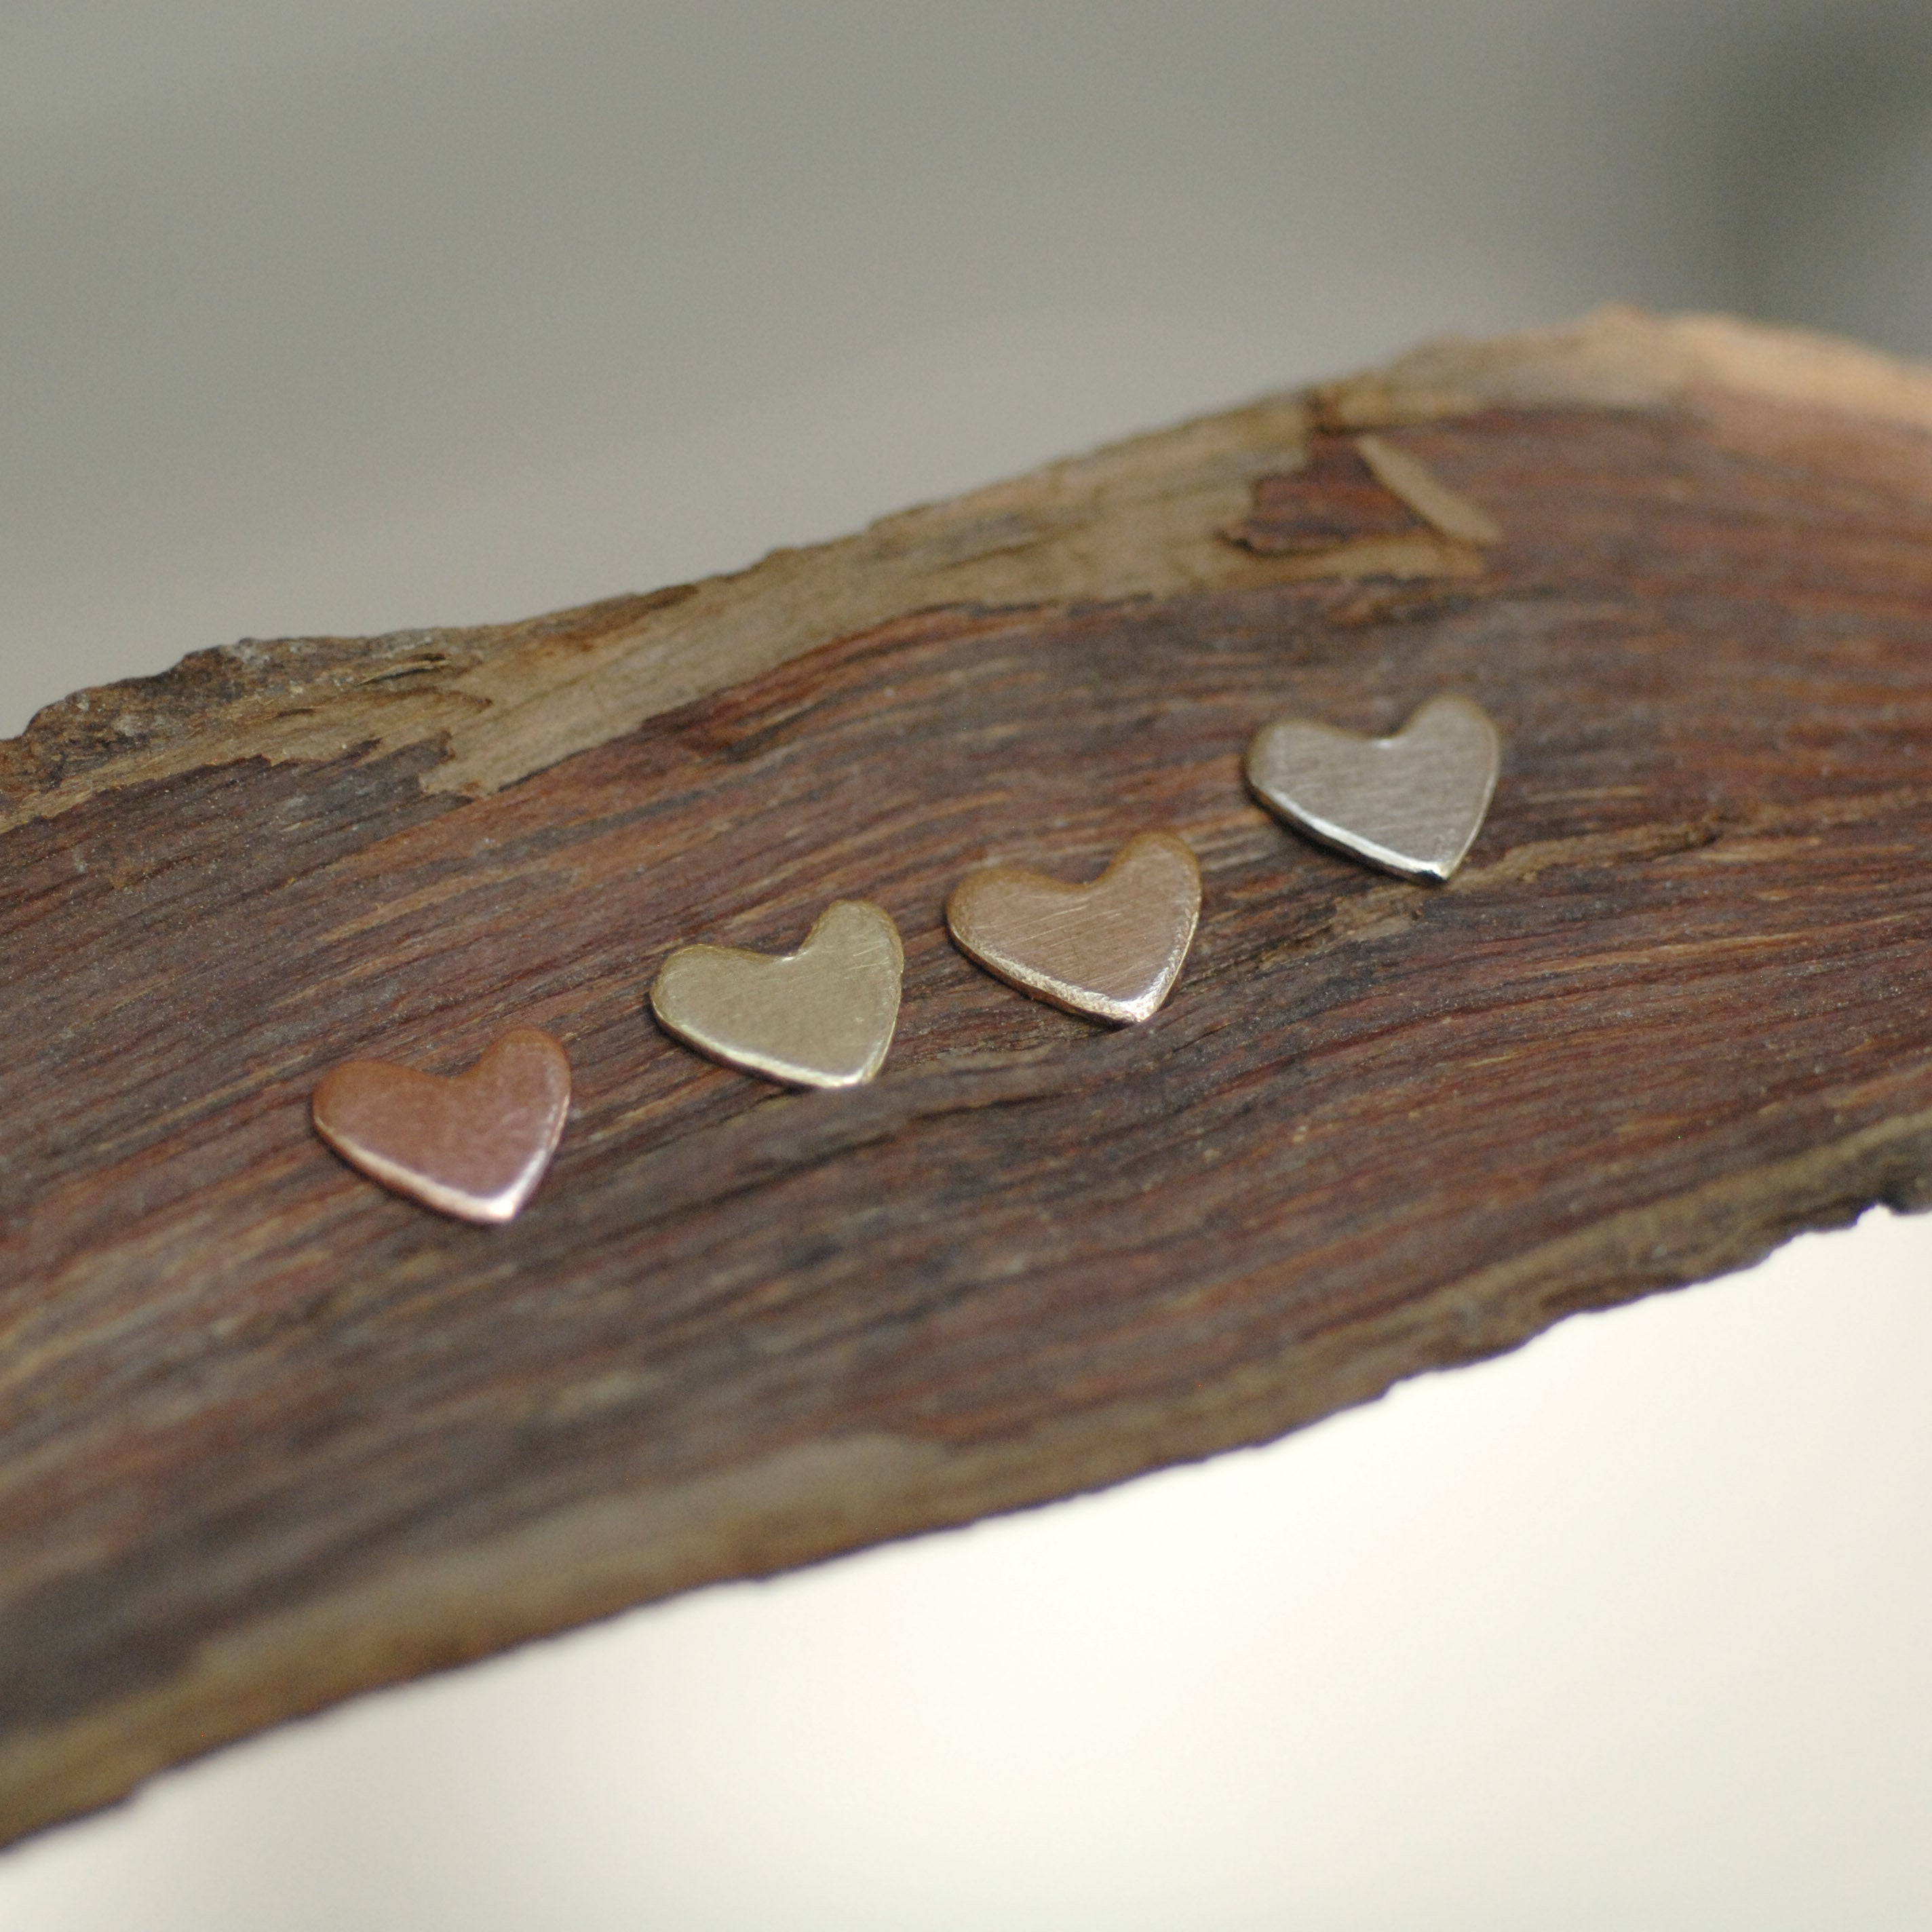 Copper Lopsided Heart 6.5mm x 6.5mm Metal Blanks Shape Form for  Enameling Stamping Texturing Blank - 6 pieces